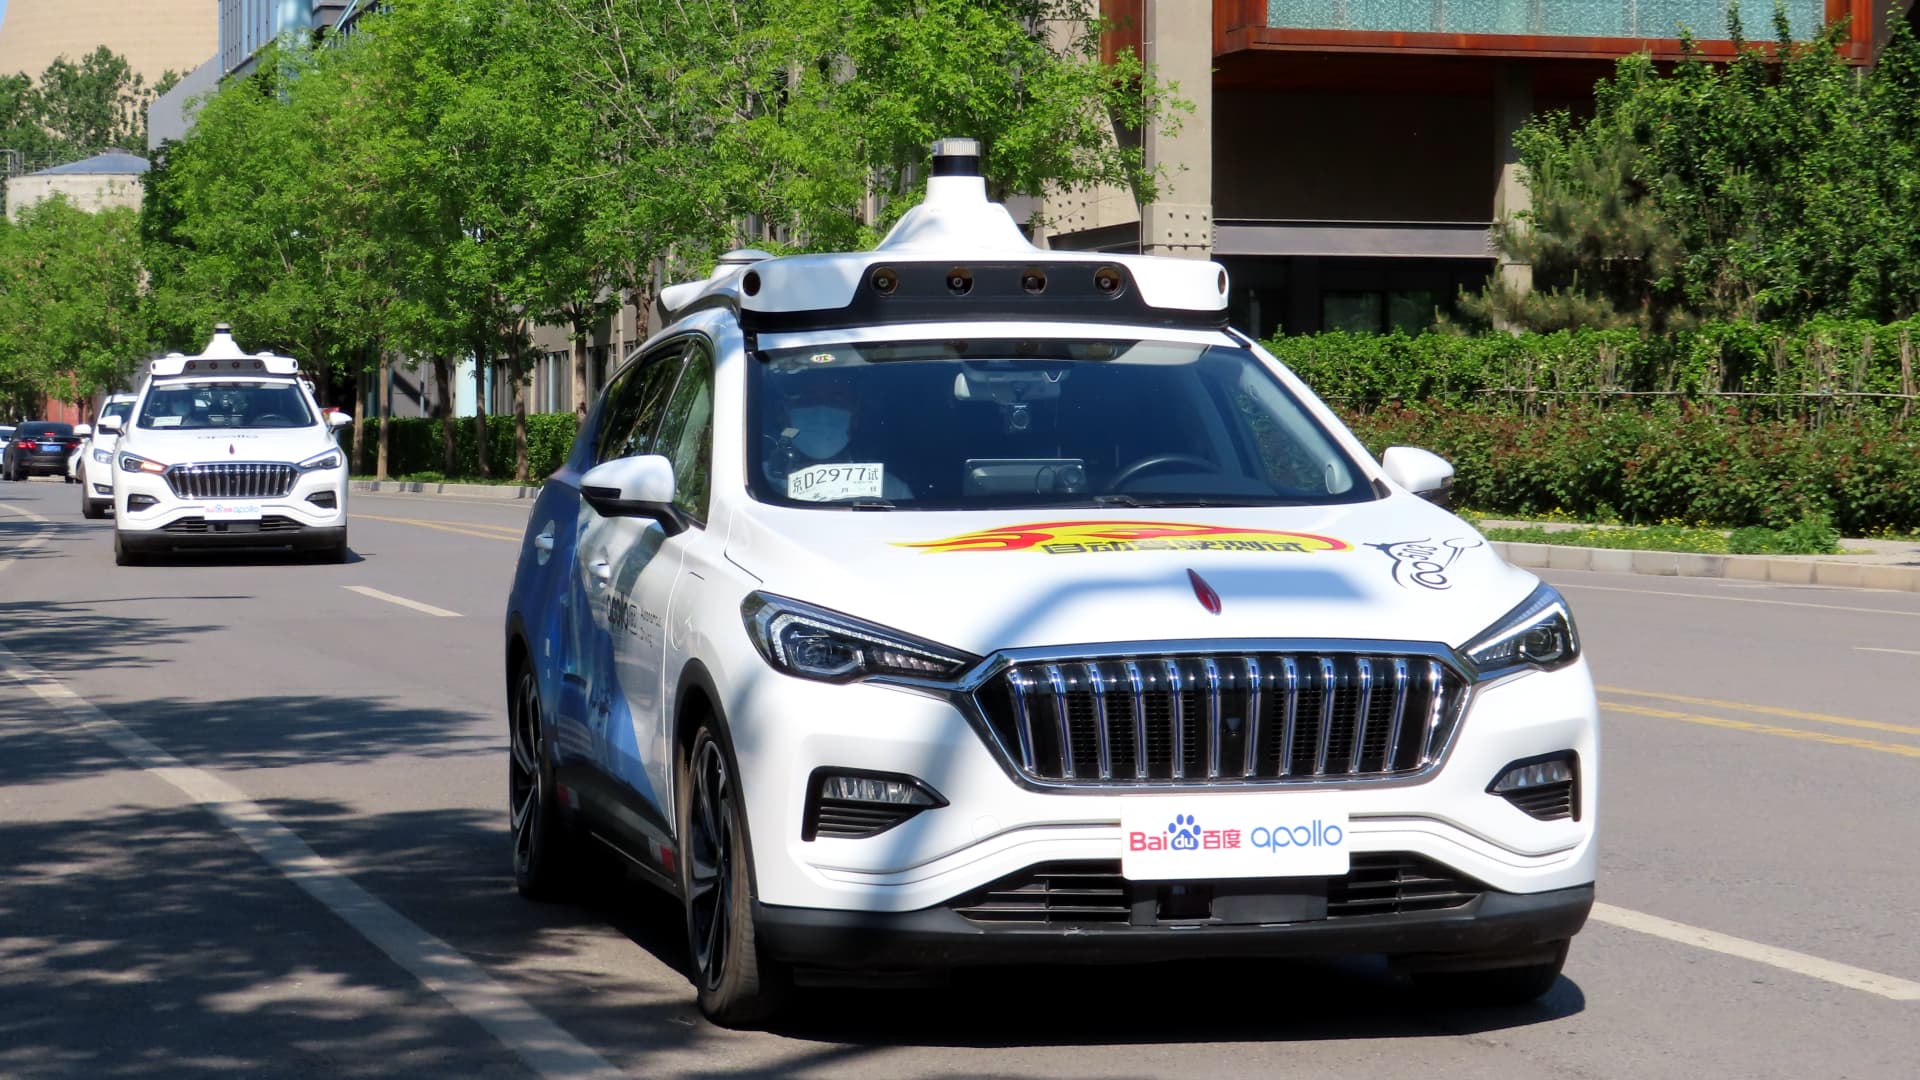 Where the billions spent on autonomous vehicles by U.S. and Chinese giants is heading